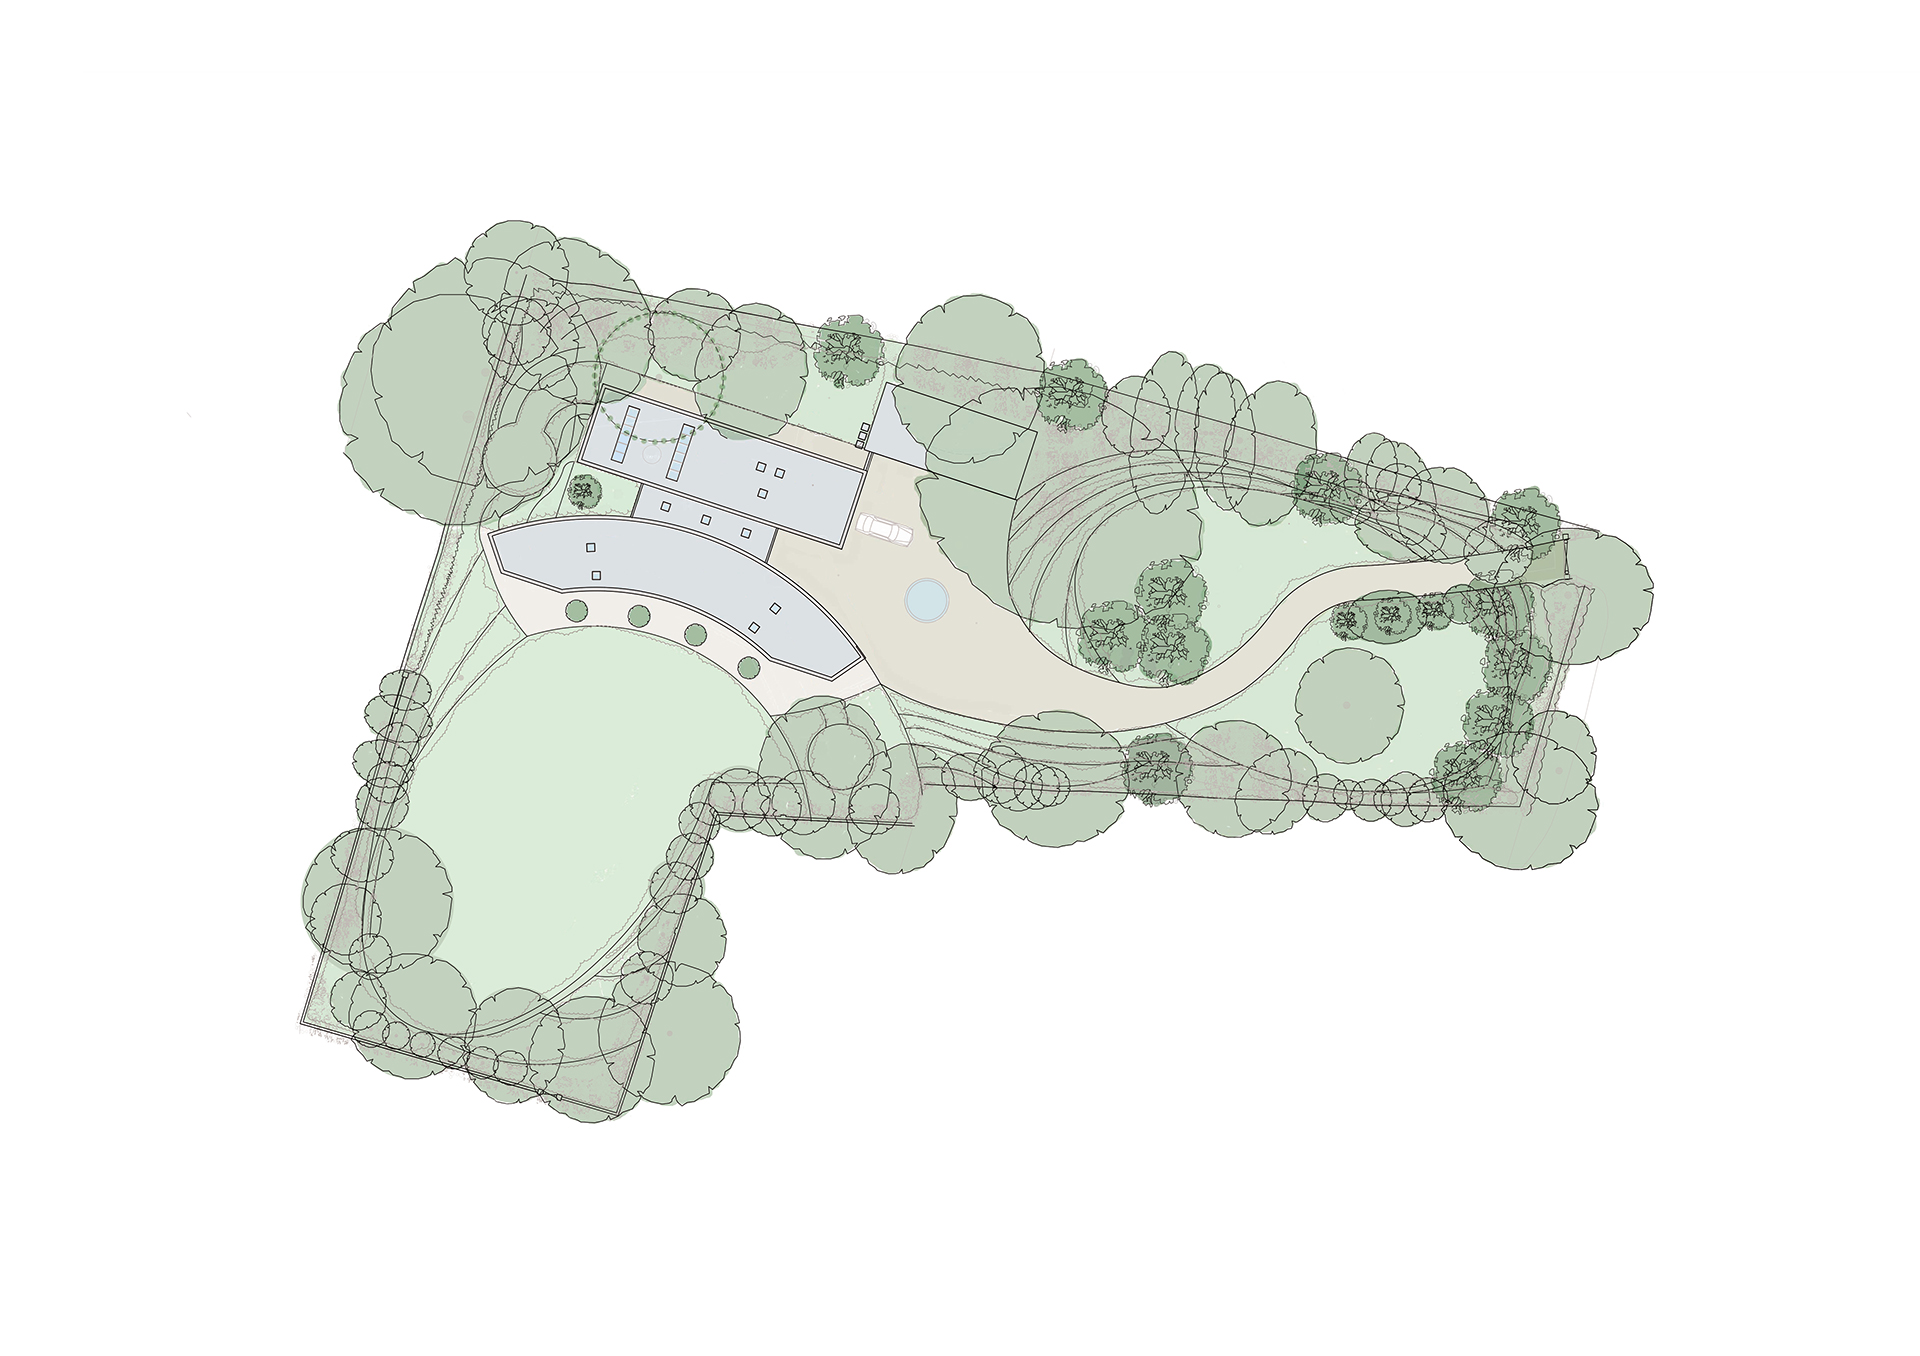 Proposed site plan of site in Poole